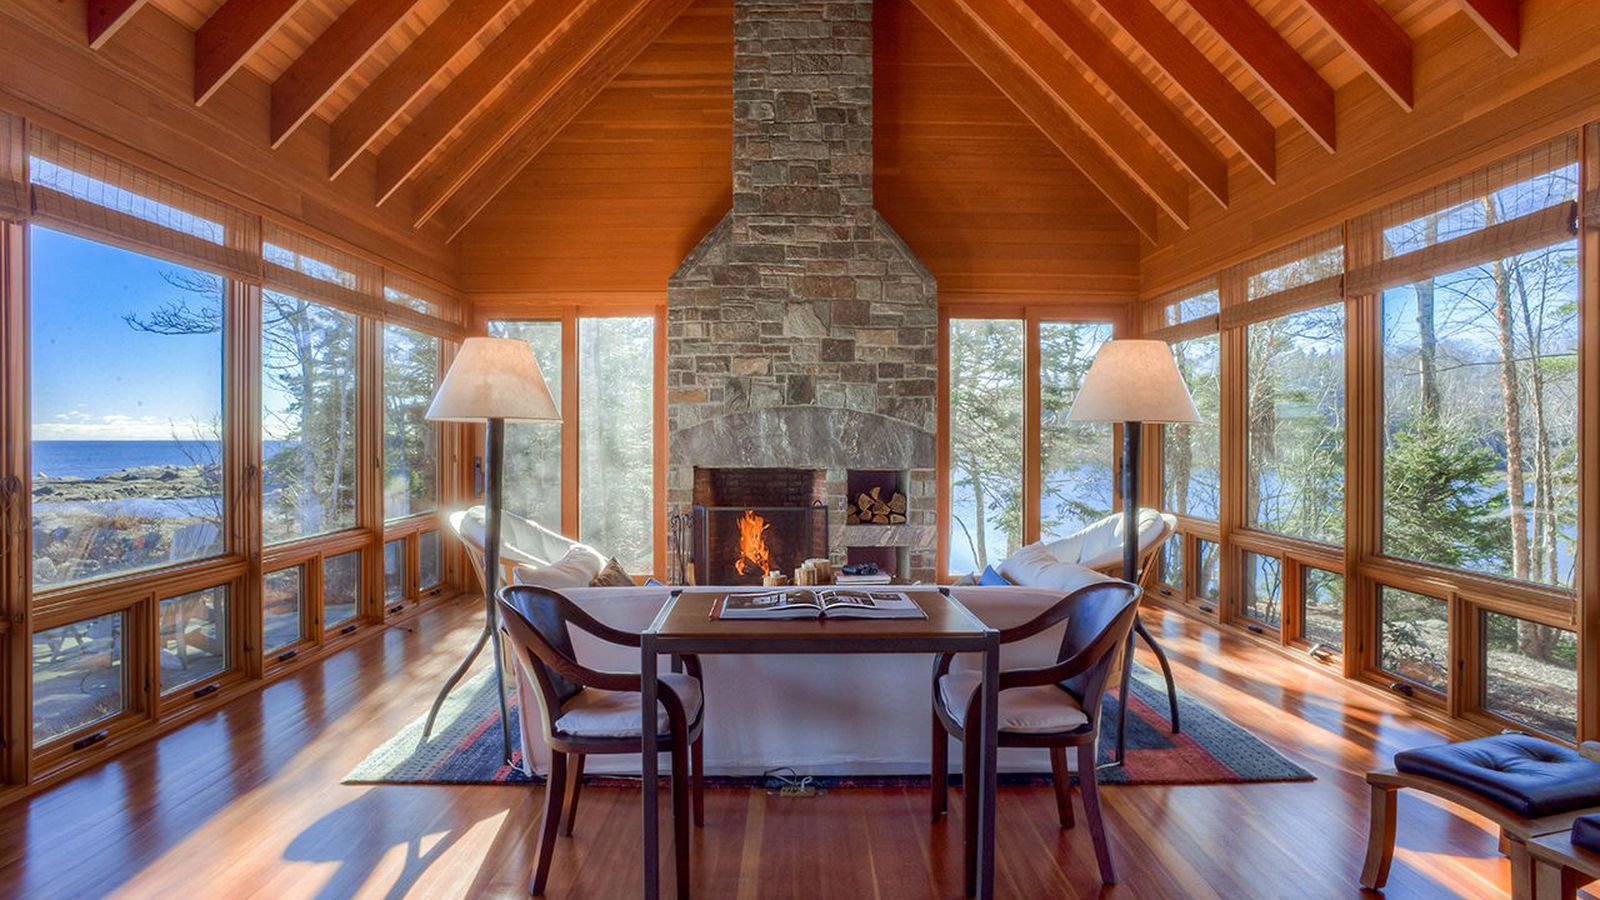 Oceanfront cottage in Maine with killer views asks 2M